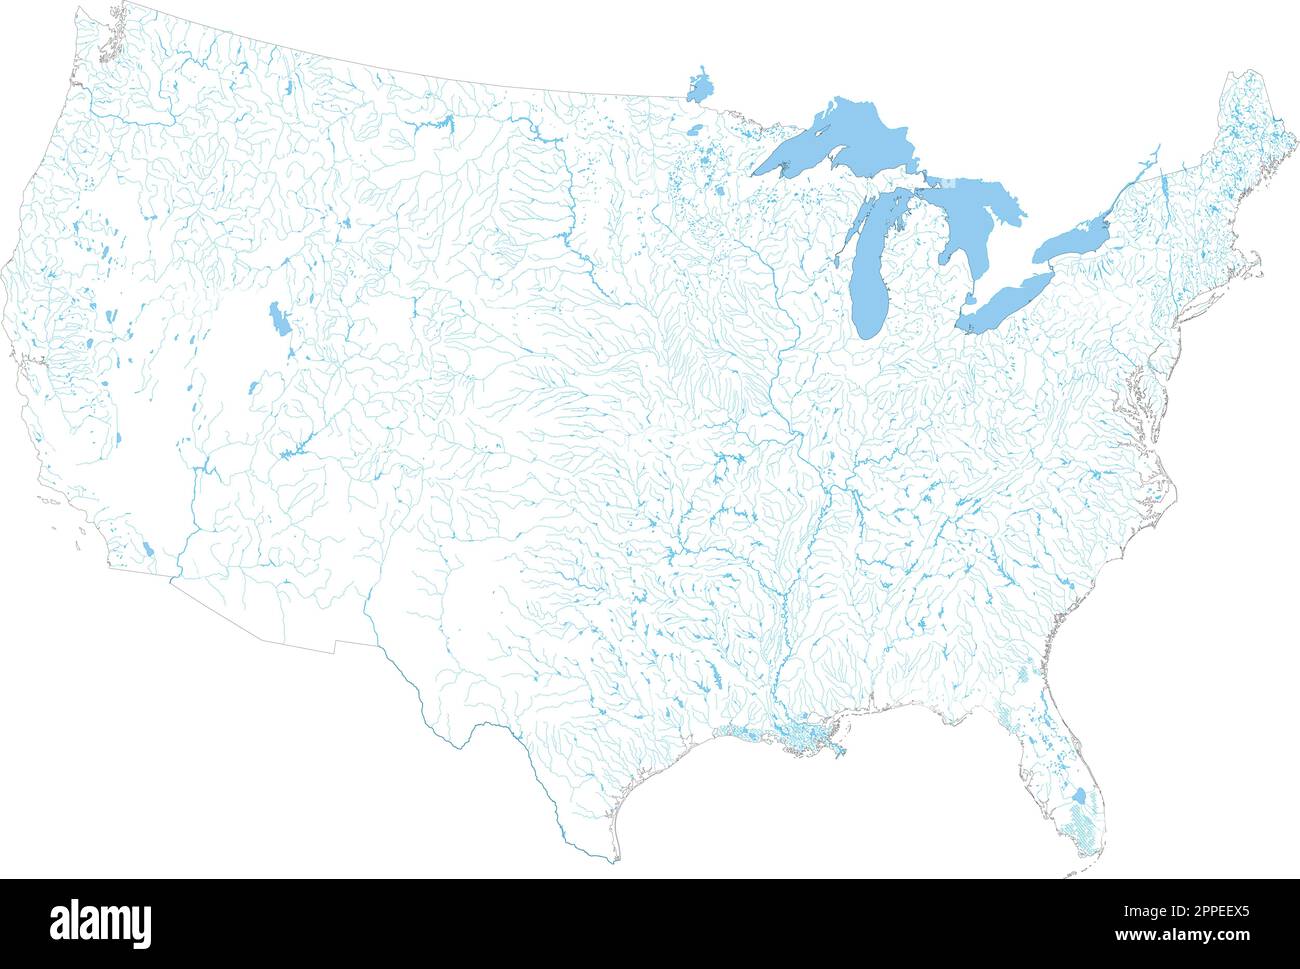 blank us map with rivers